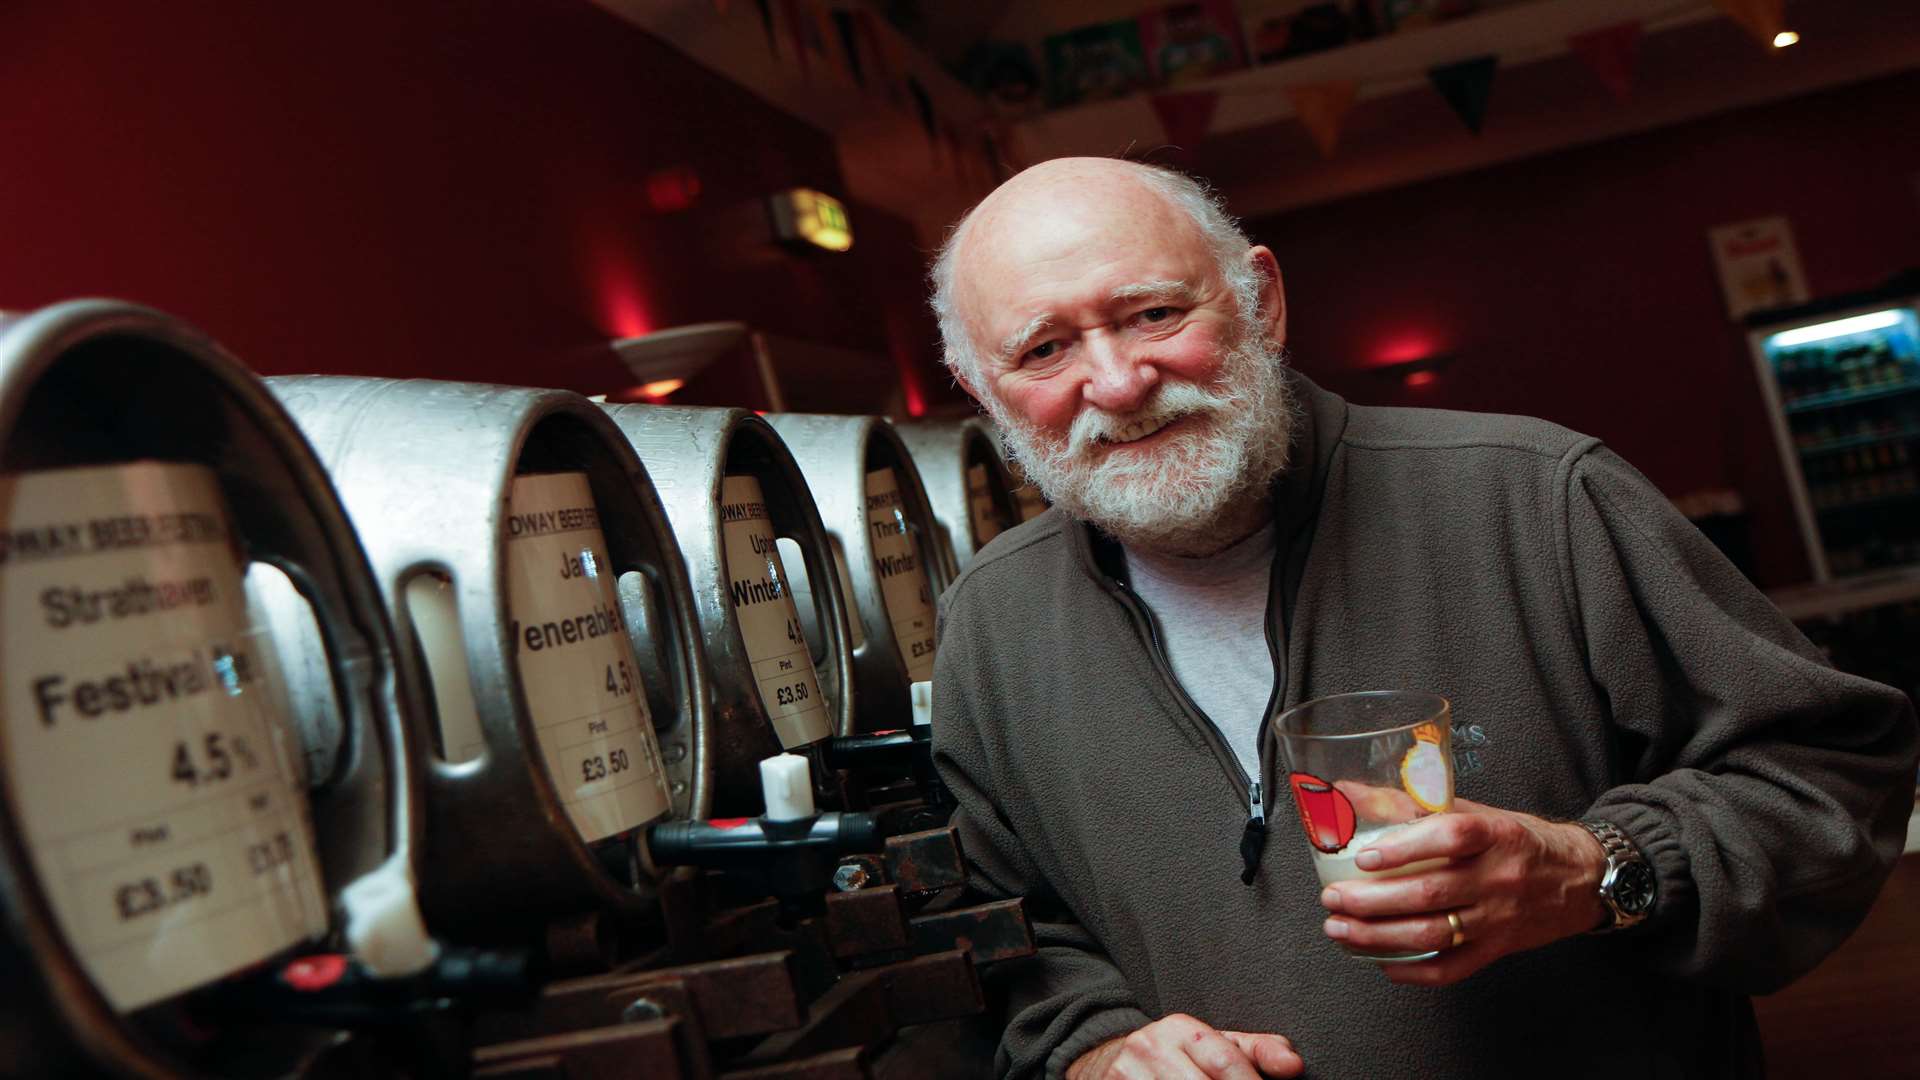 John Brice at the opening of the Medway Beer Festival